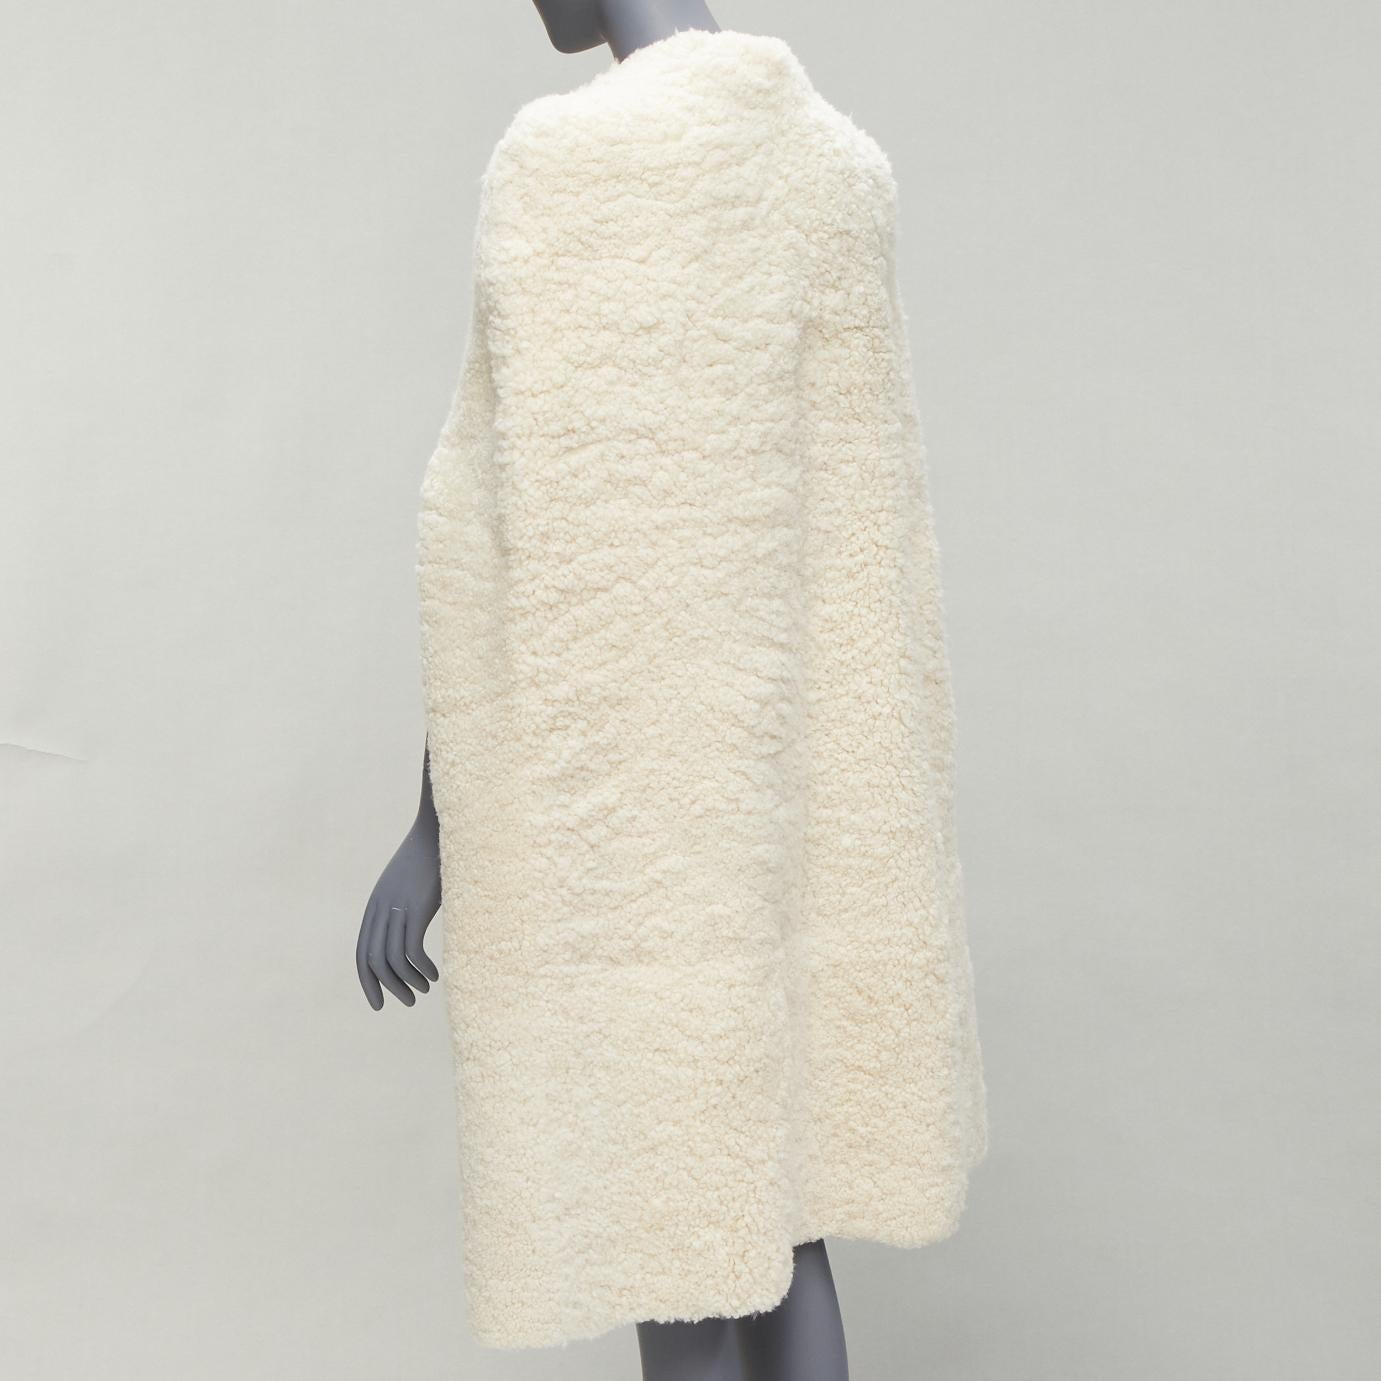 rare OLD CELINE Phoebe Philo 2010 Runway gold buckle cream shearling cape FR36 For Sale 1